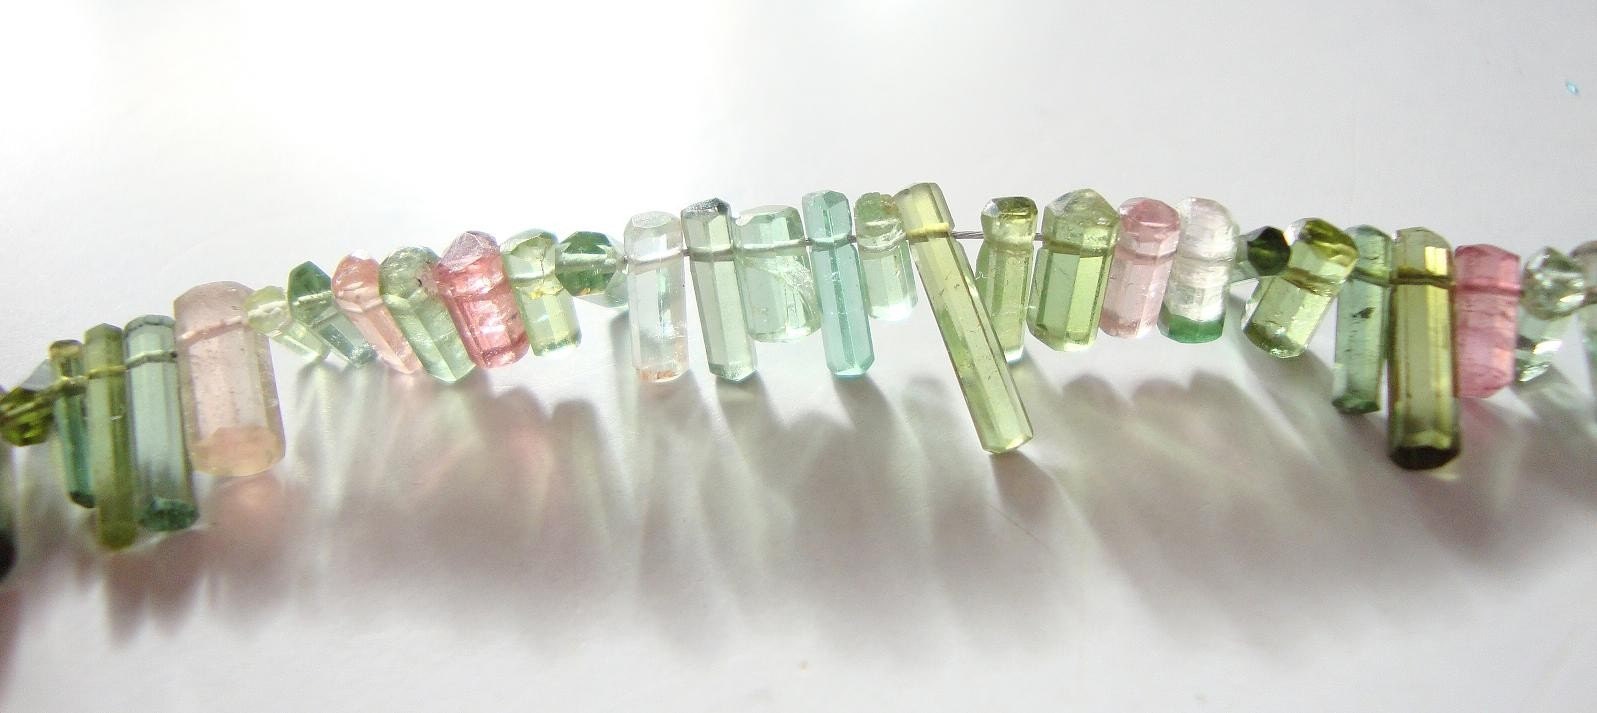 TOP QUALITY FACETED TOURMALINE CRYSTAL BEADS 4  INCH STRAND